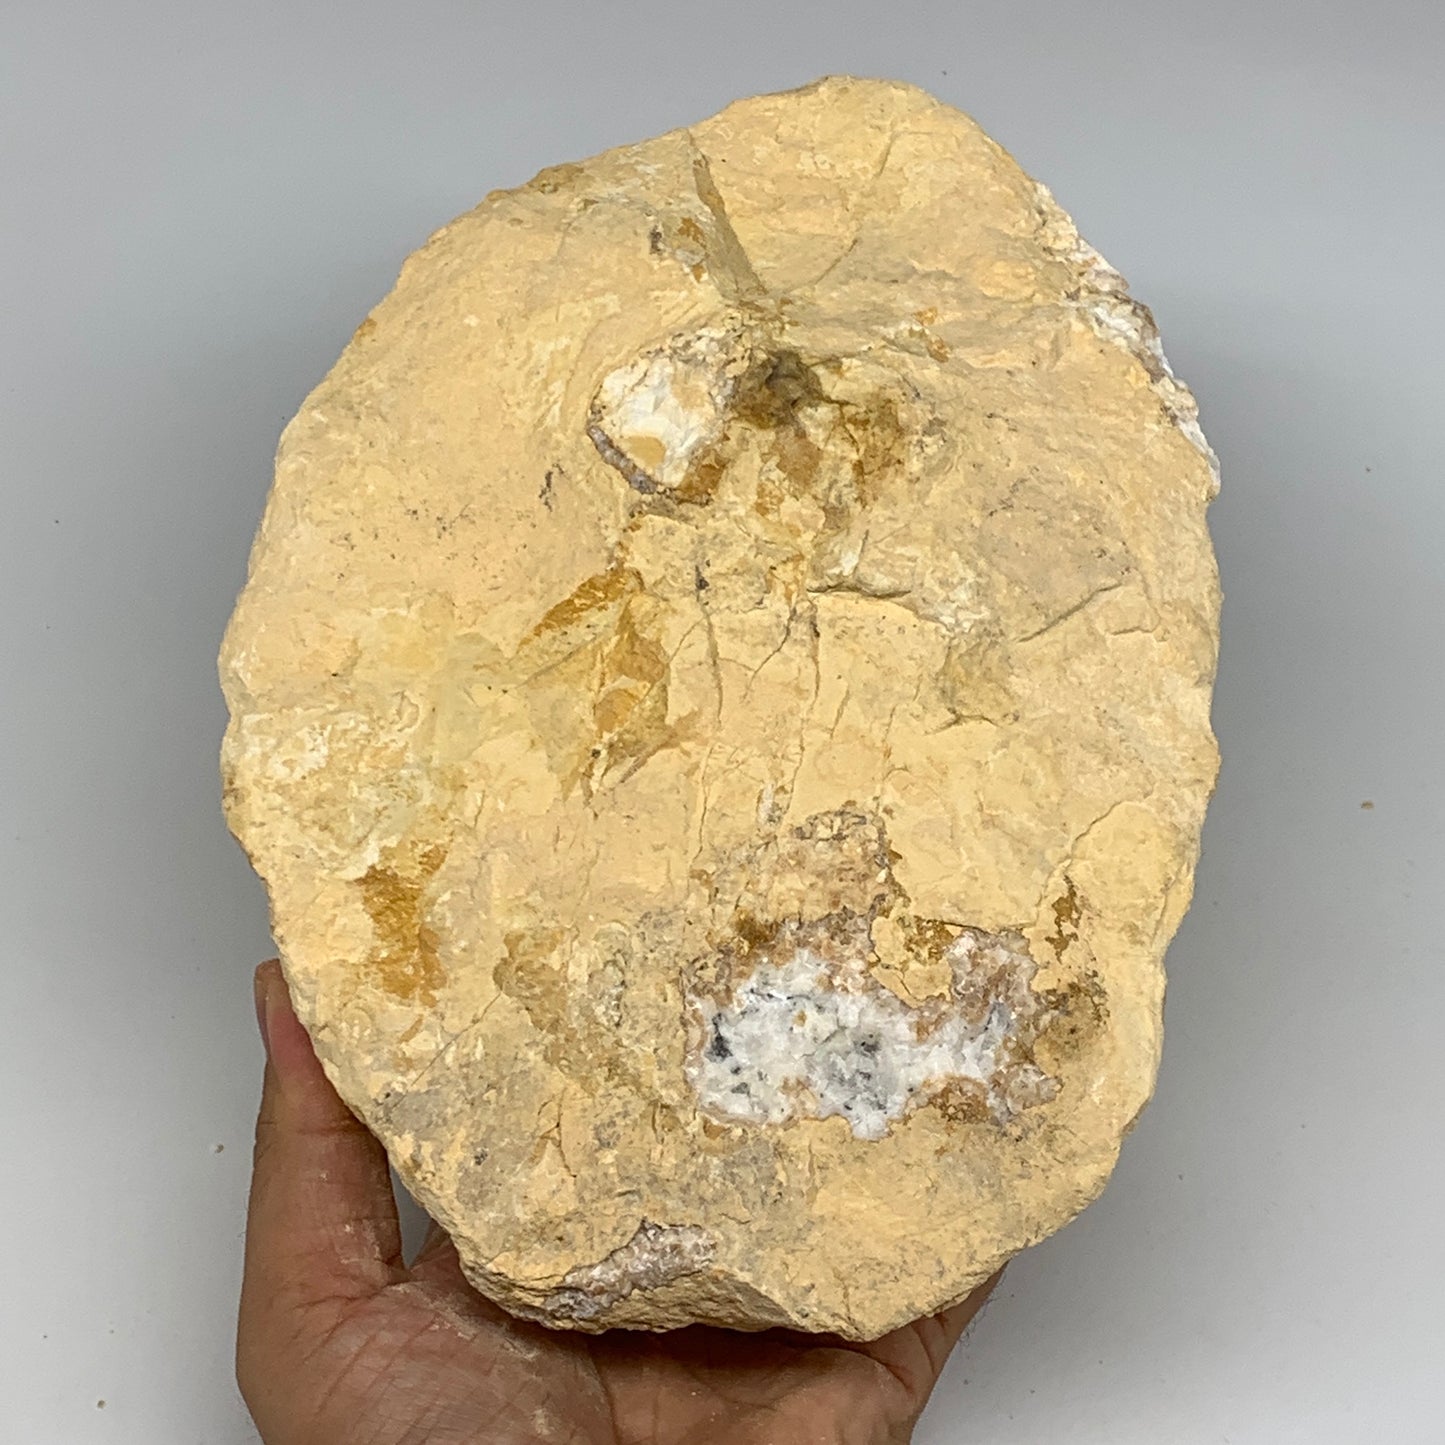 5.56 lbs, 8.5"x5.8"x3.2", Natural Calcite Geode Mineral Specimens @Morocco, B111